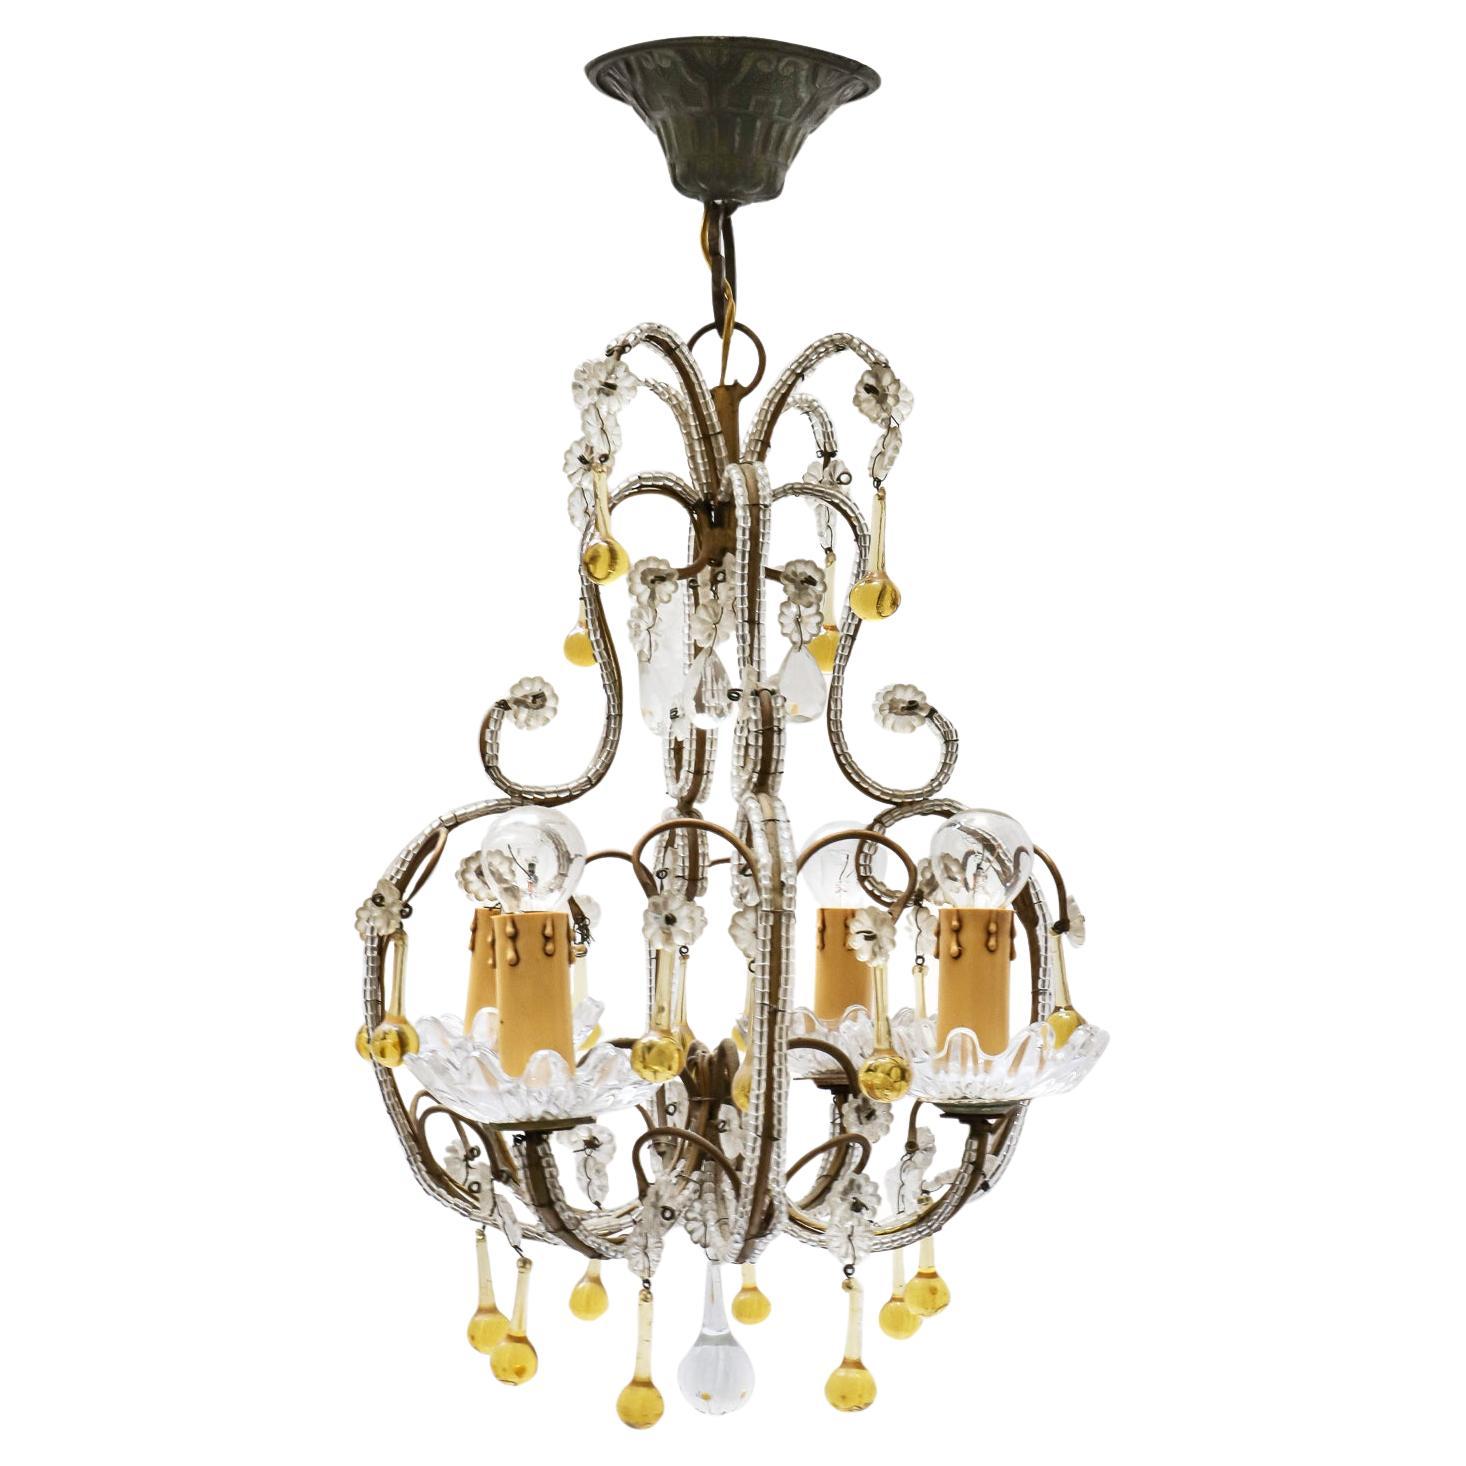 Vintage Small Crystal Beaded Yellow Italian Petite Chandelier Fixture For Sale